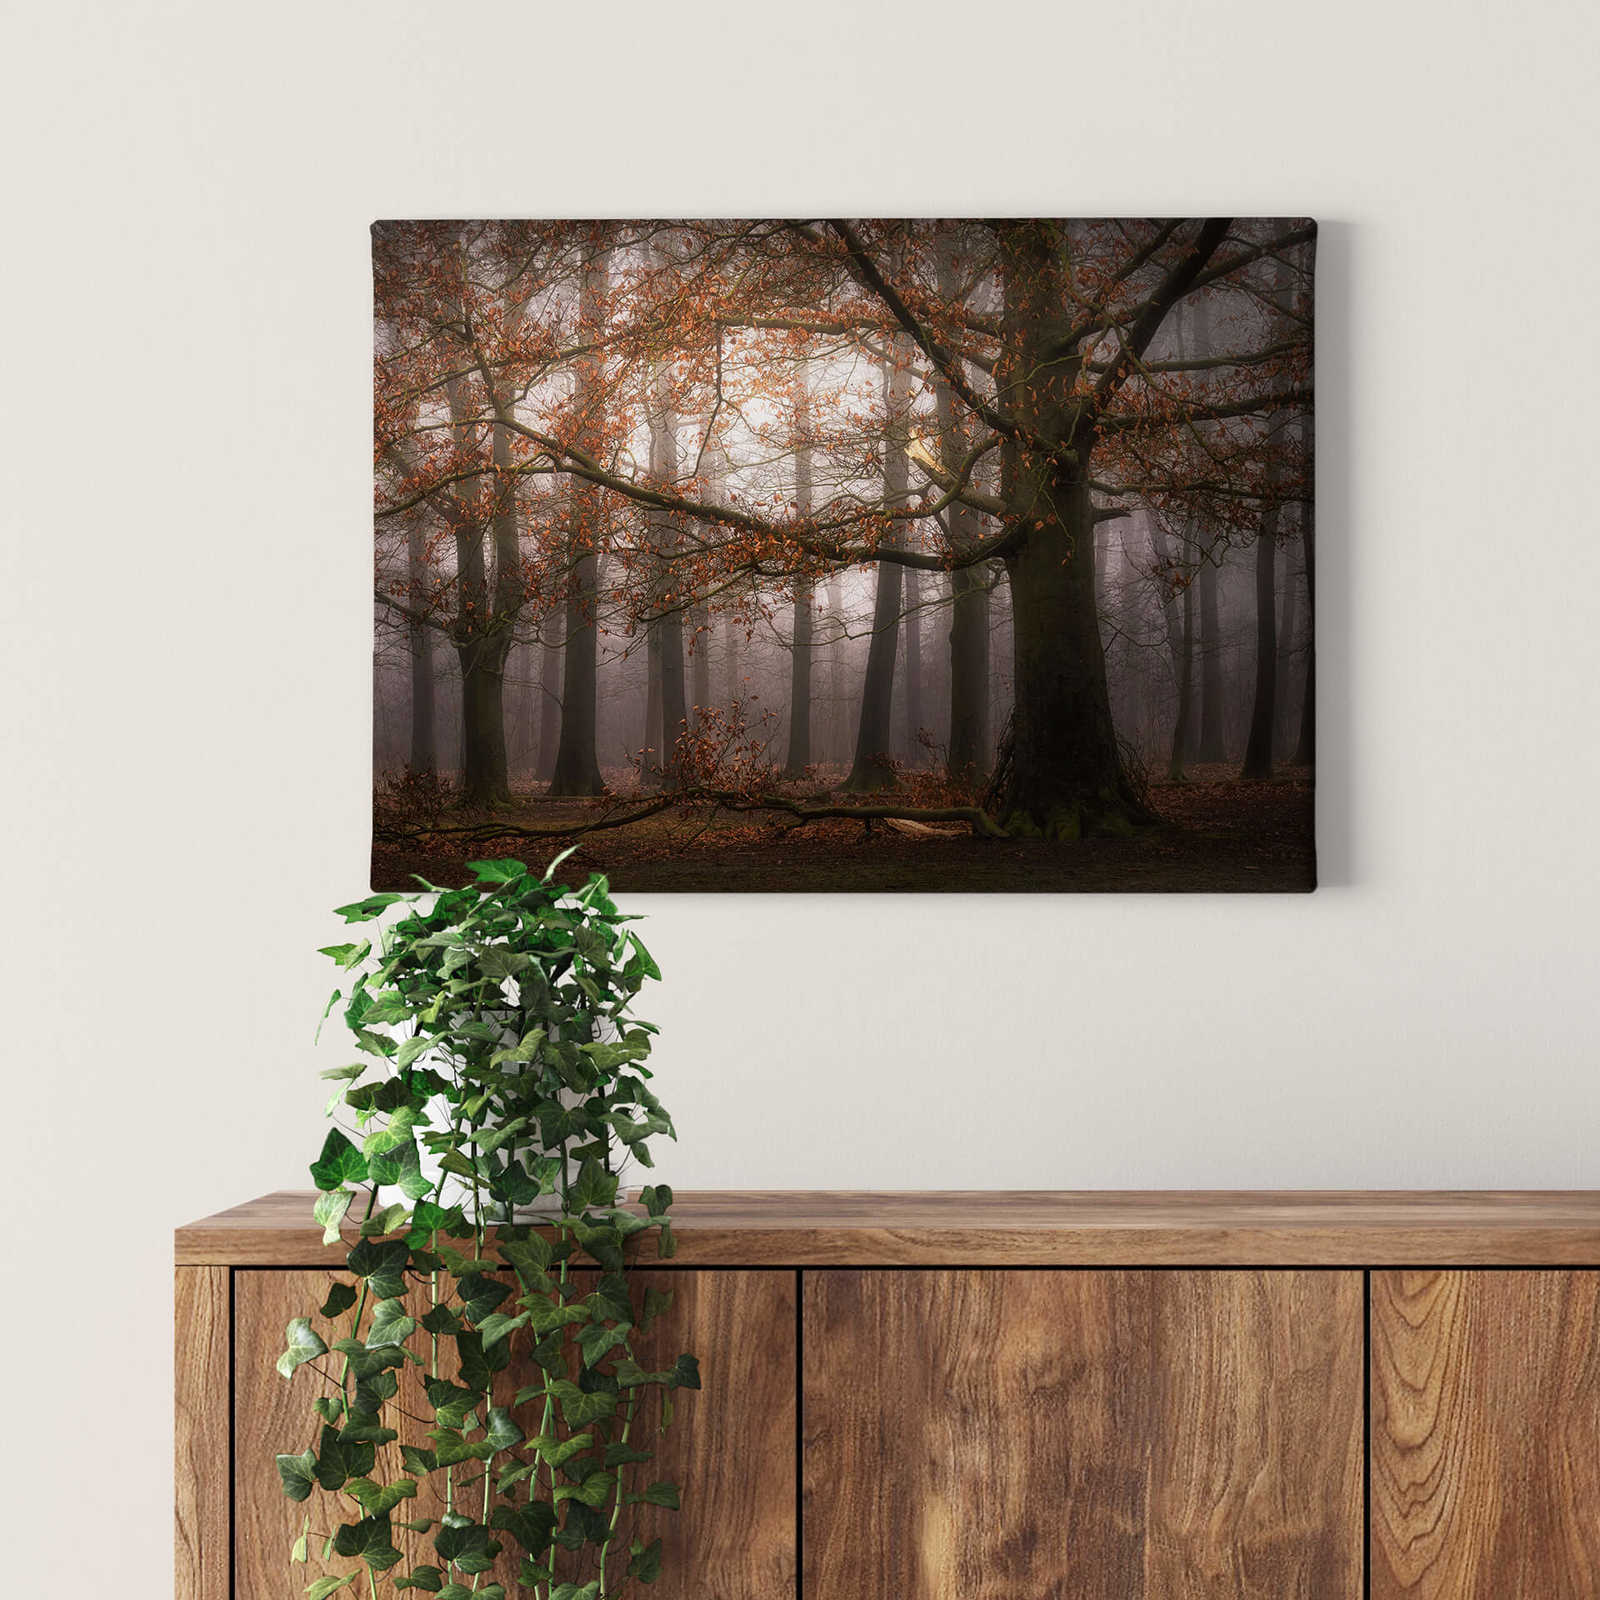             Canvas print with leafy forest in november by Digemans
        